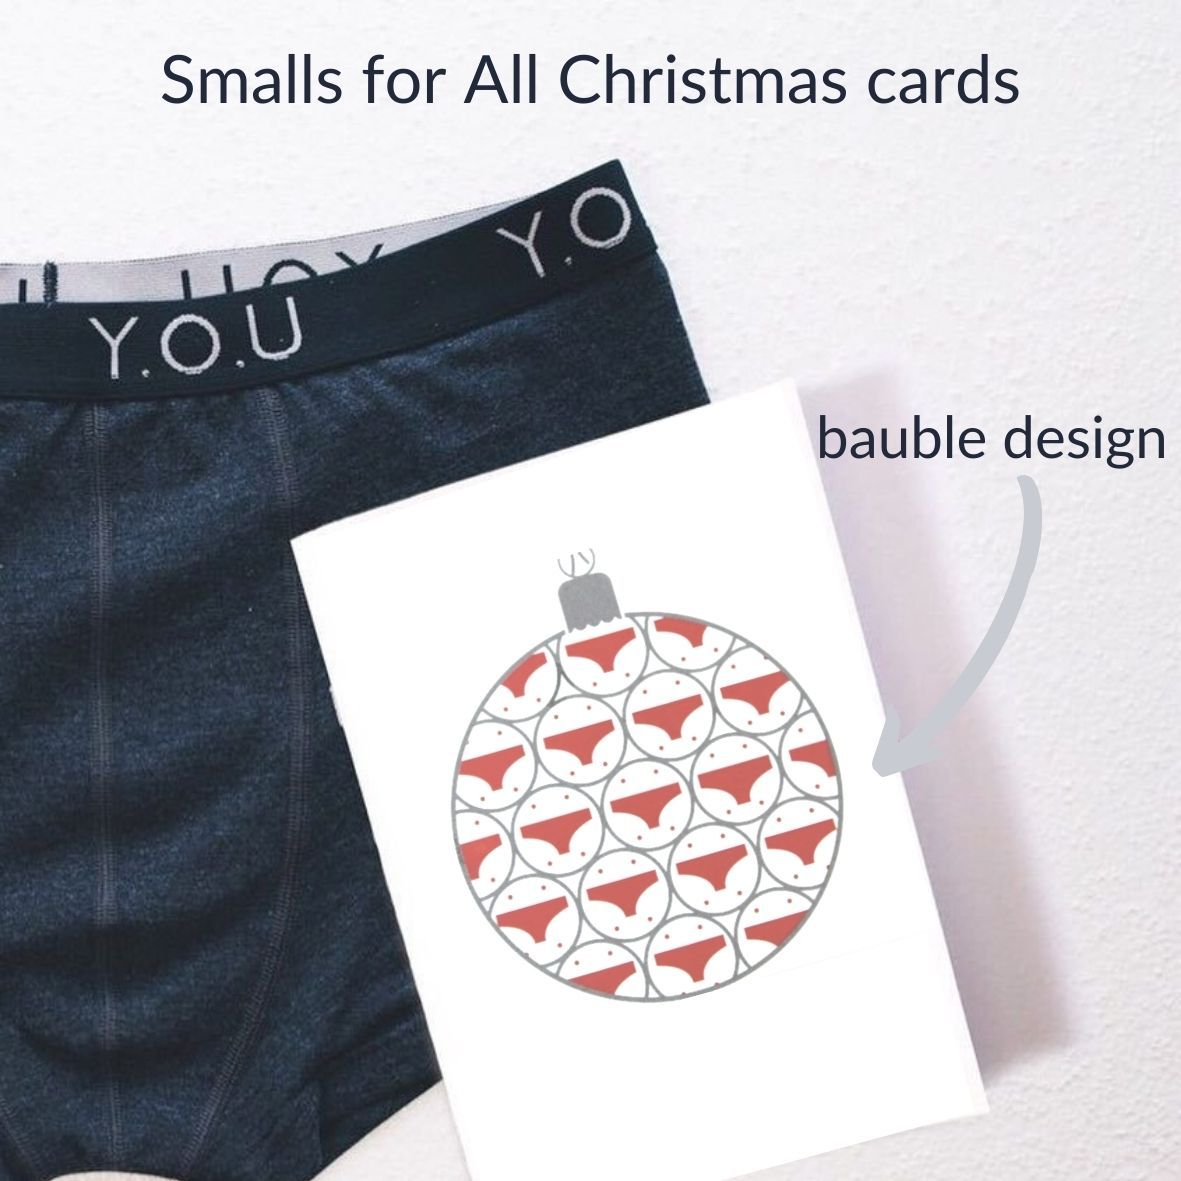 Pack of 10 Charity Christmas Cards - Smalls For All